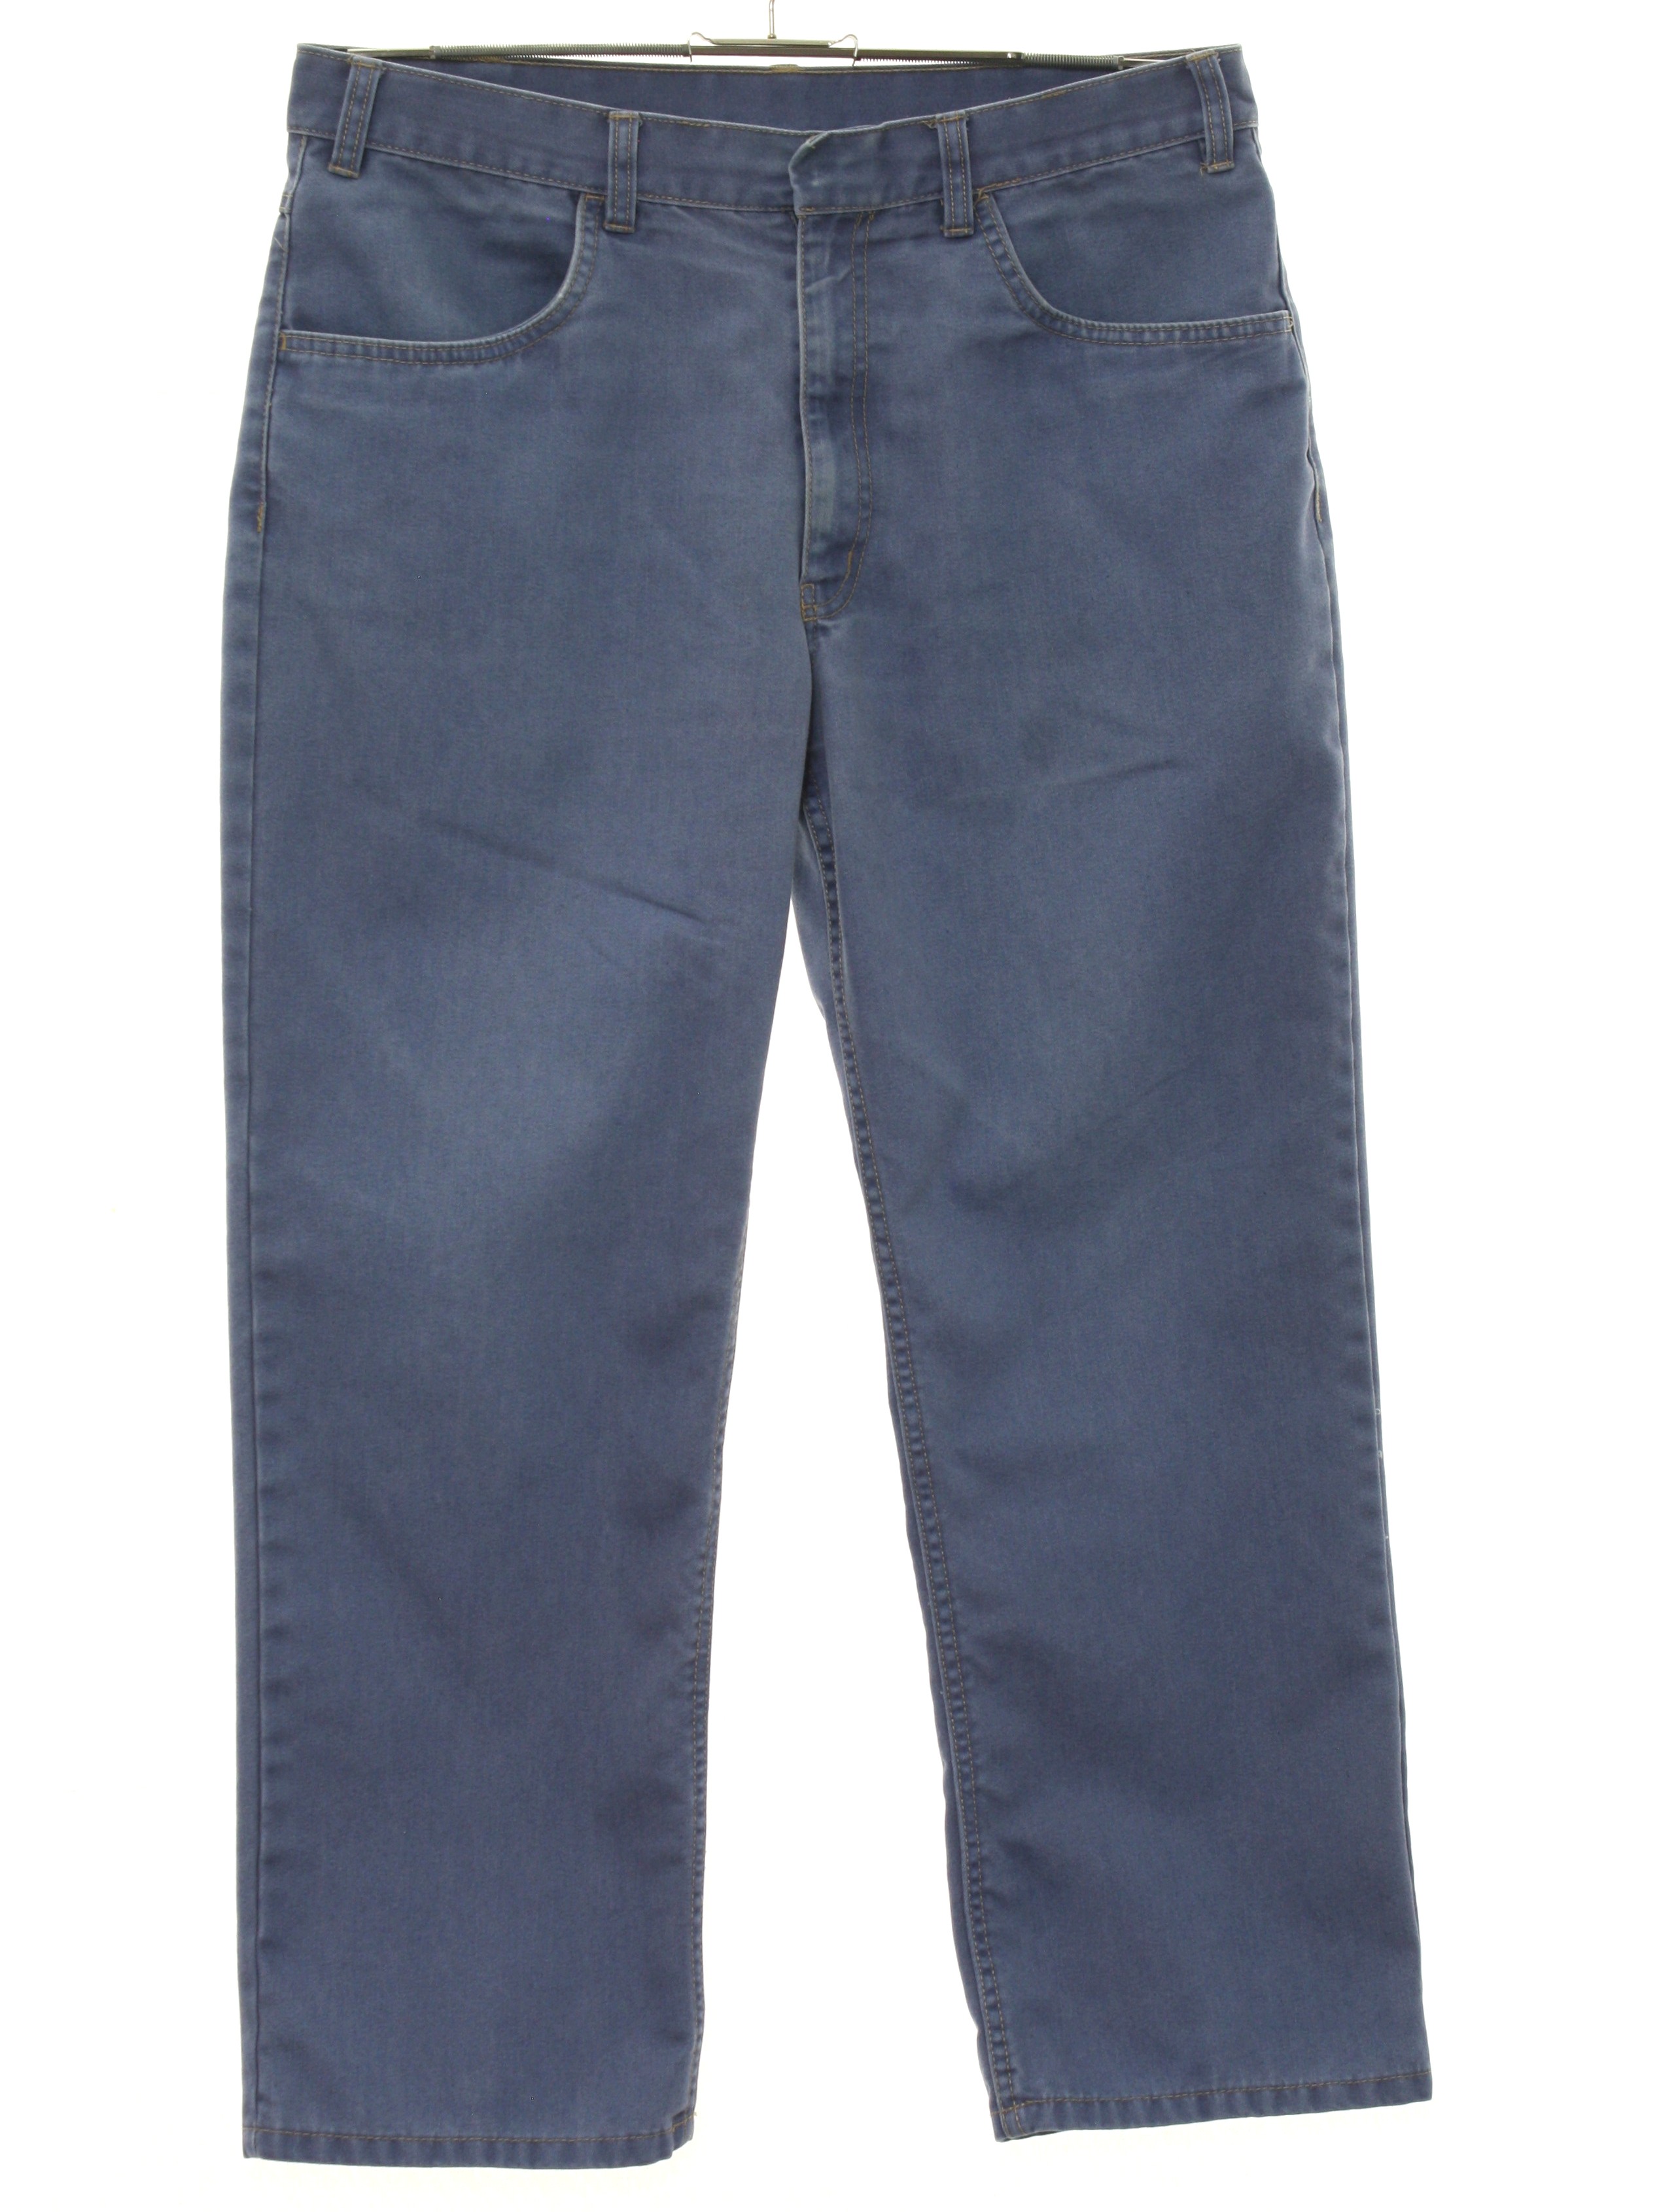 Retro 80s Pants (Towncraft) : 80s -Towncraft- Mens light blue solid ...